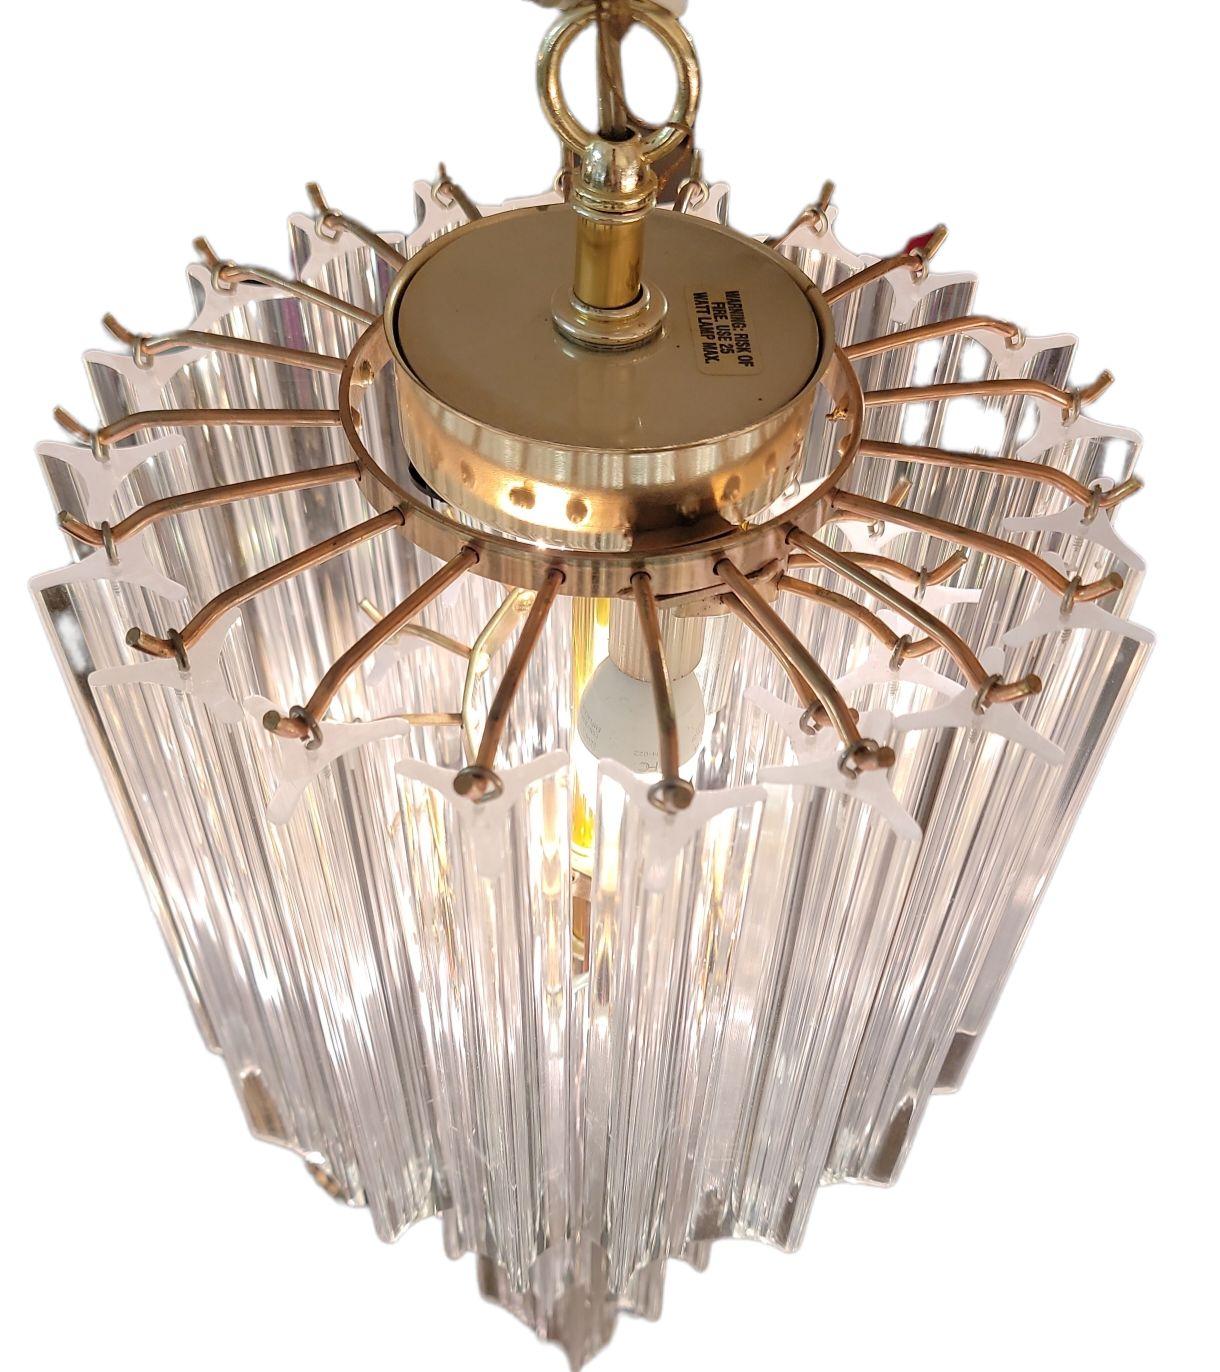 Midcentury Large Three Tier Lucite Waterfall Chandelier with brass frame- Measures Approx. 19 high x 24 diameter.